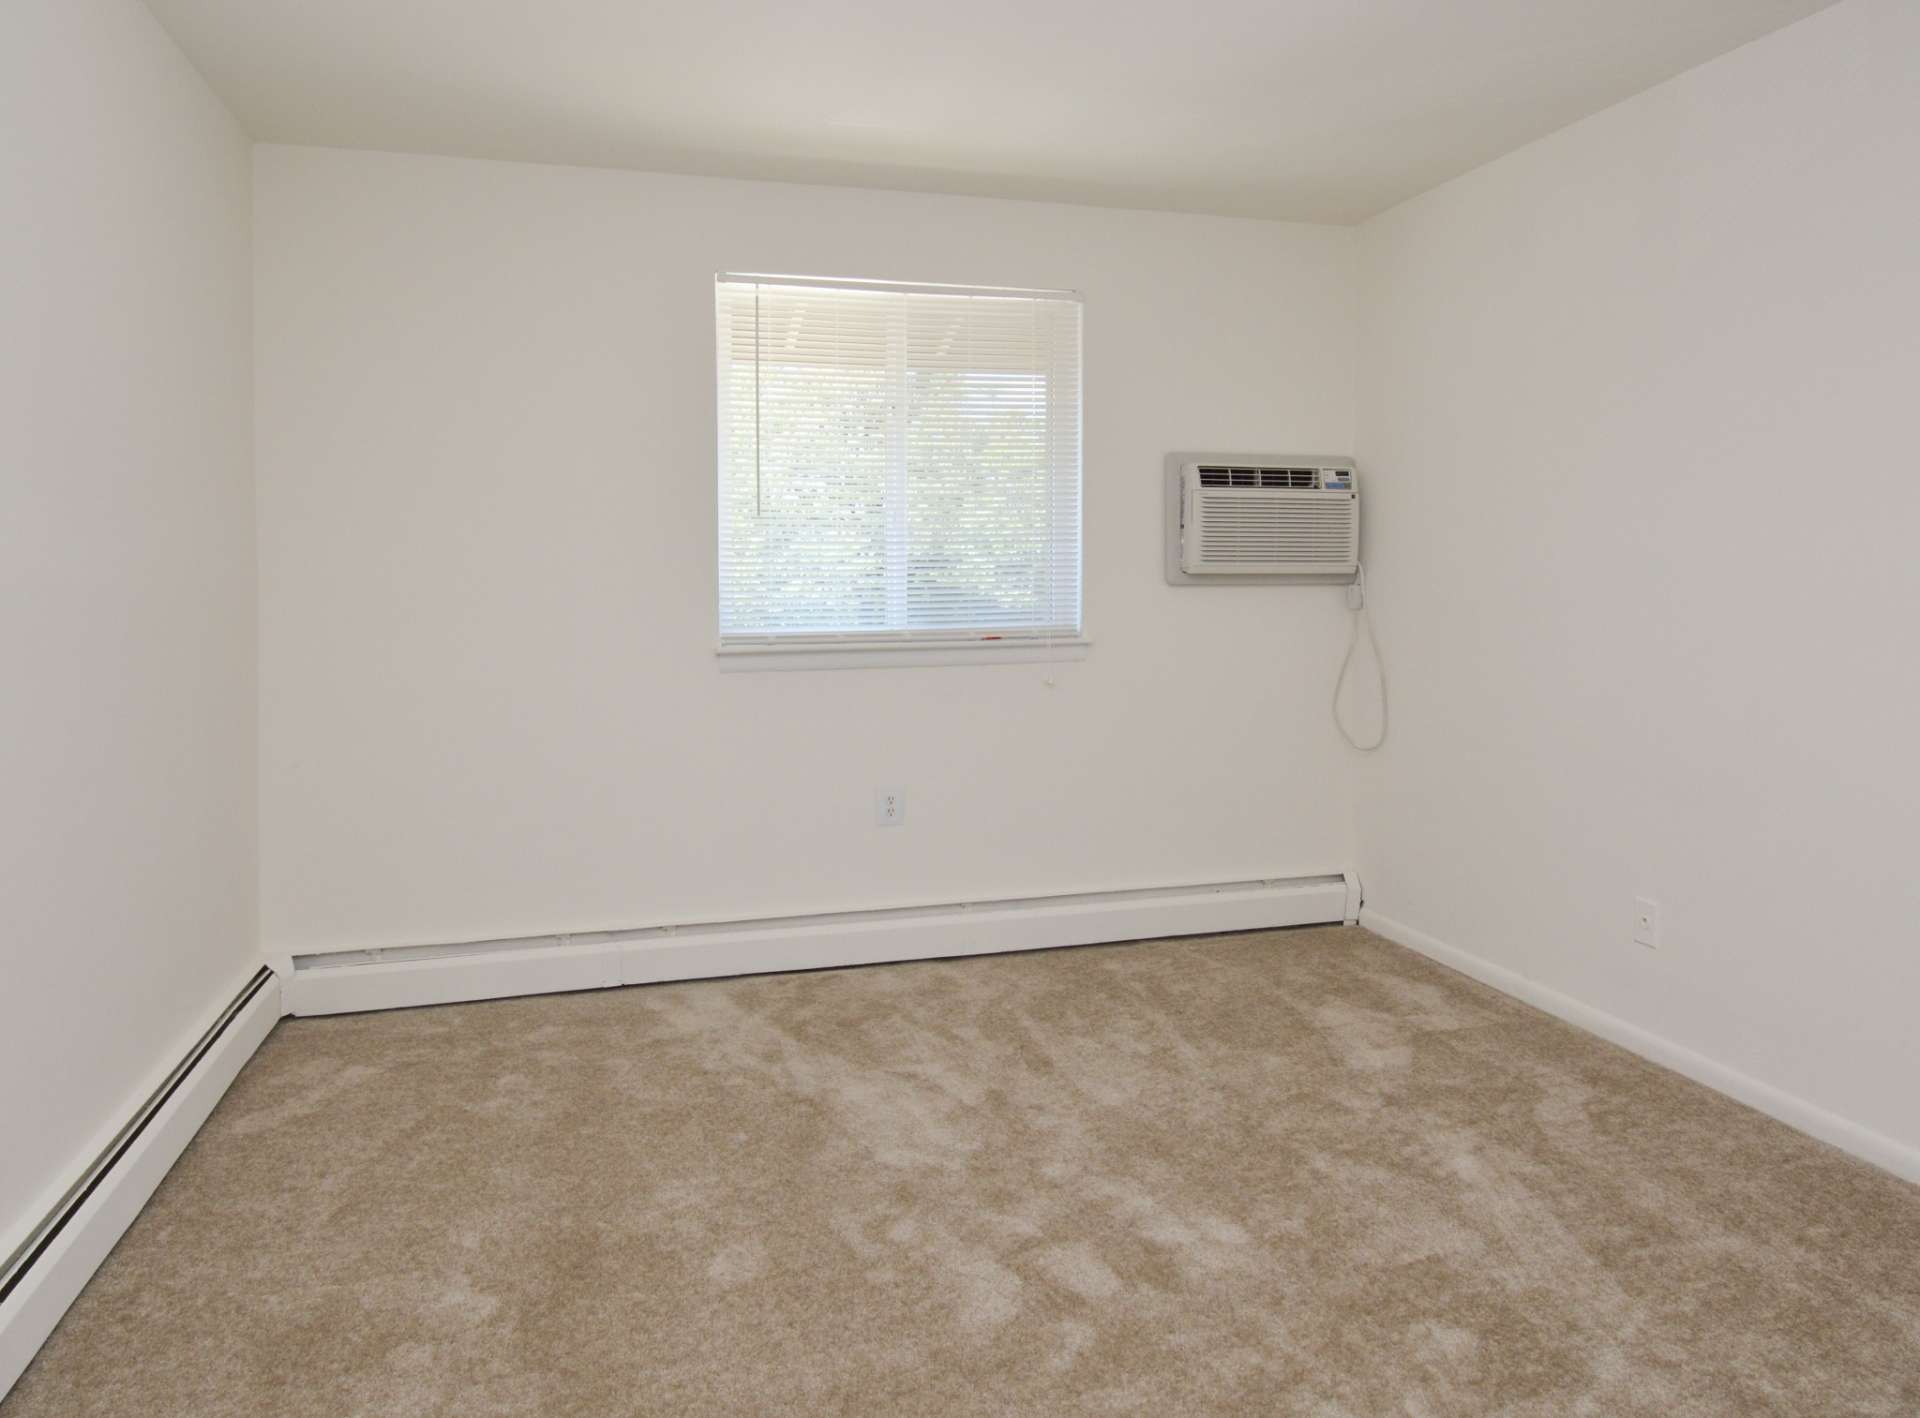 Bedroom with a window and beige carpets.